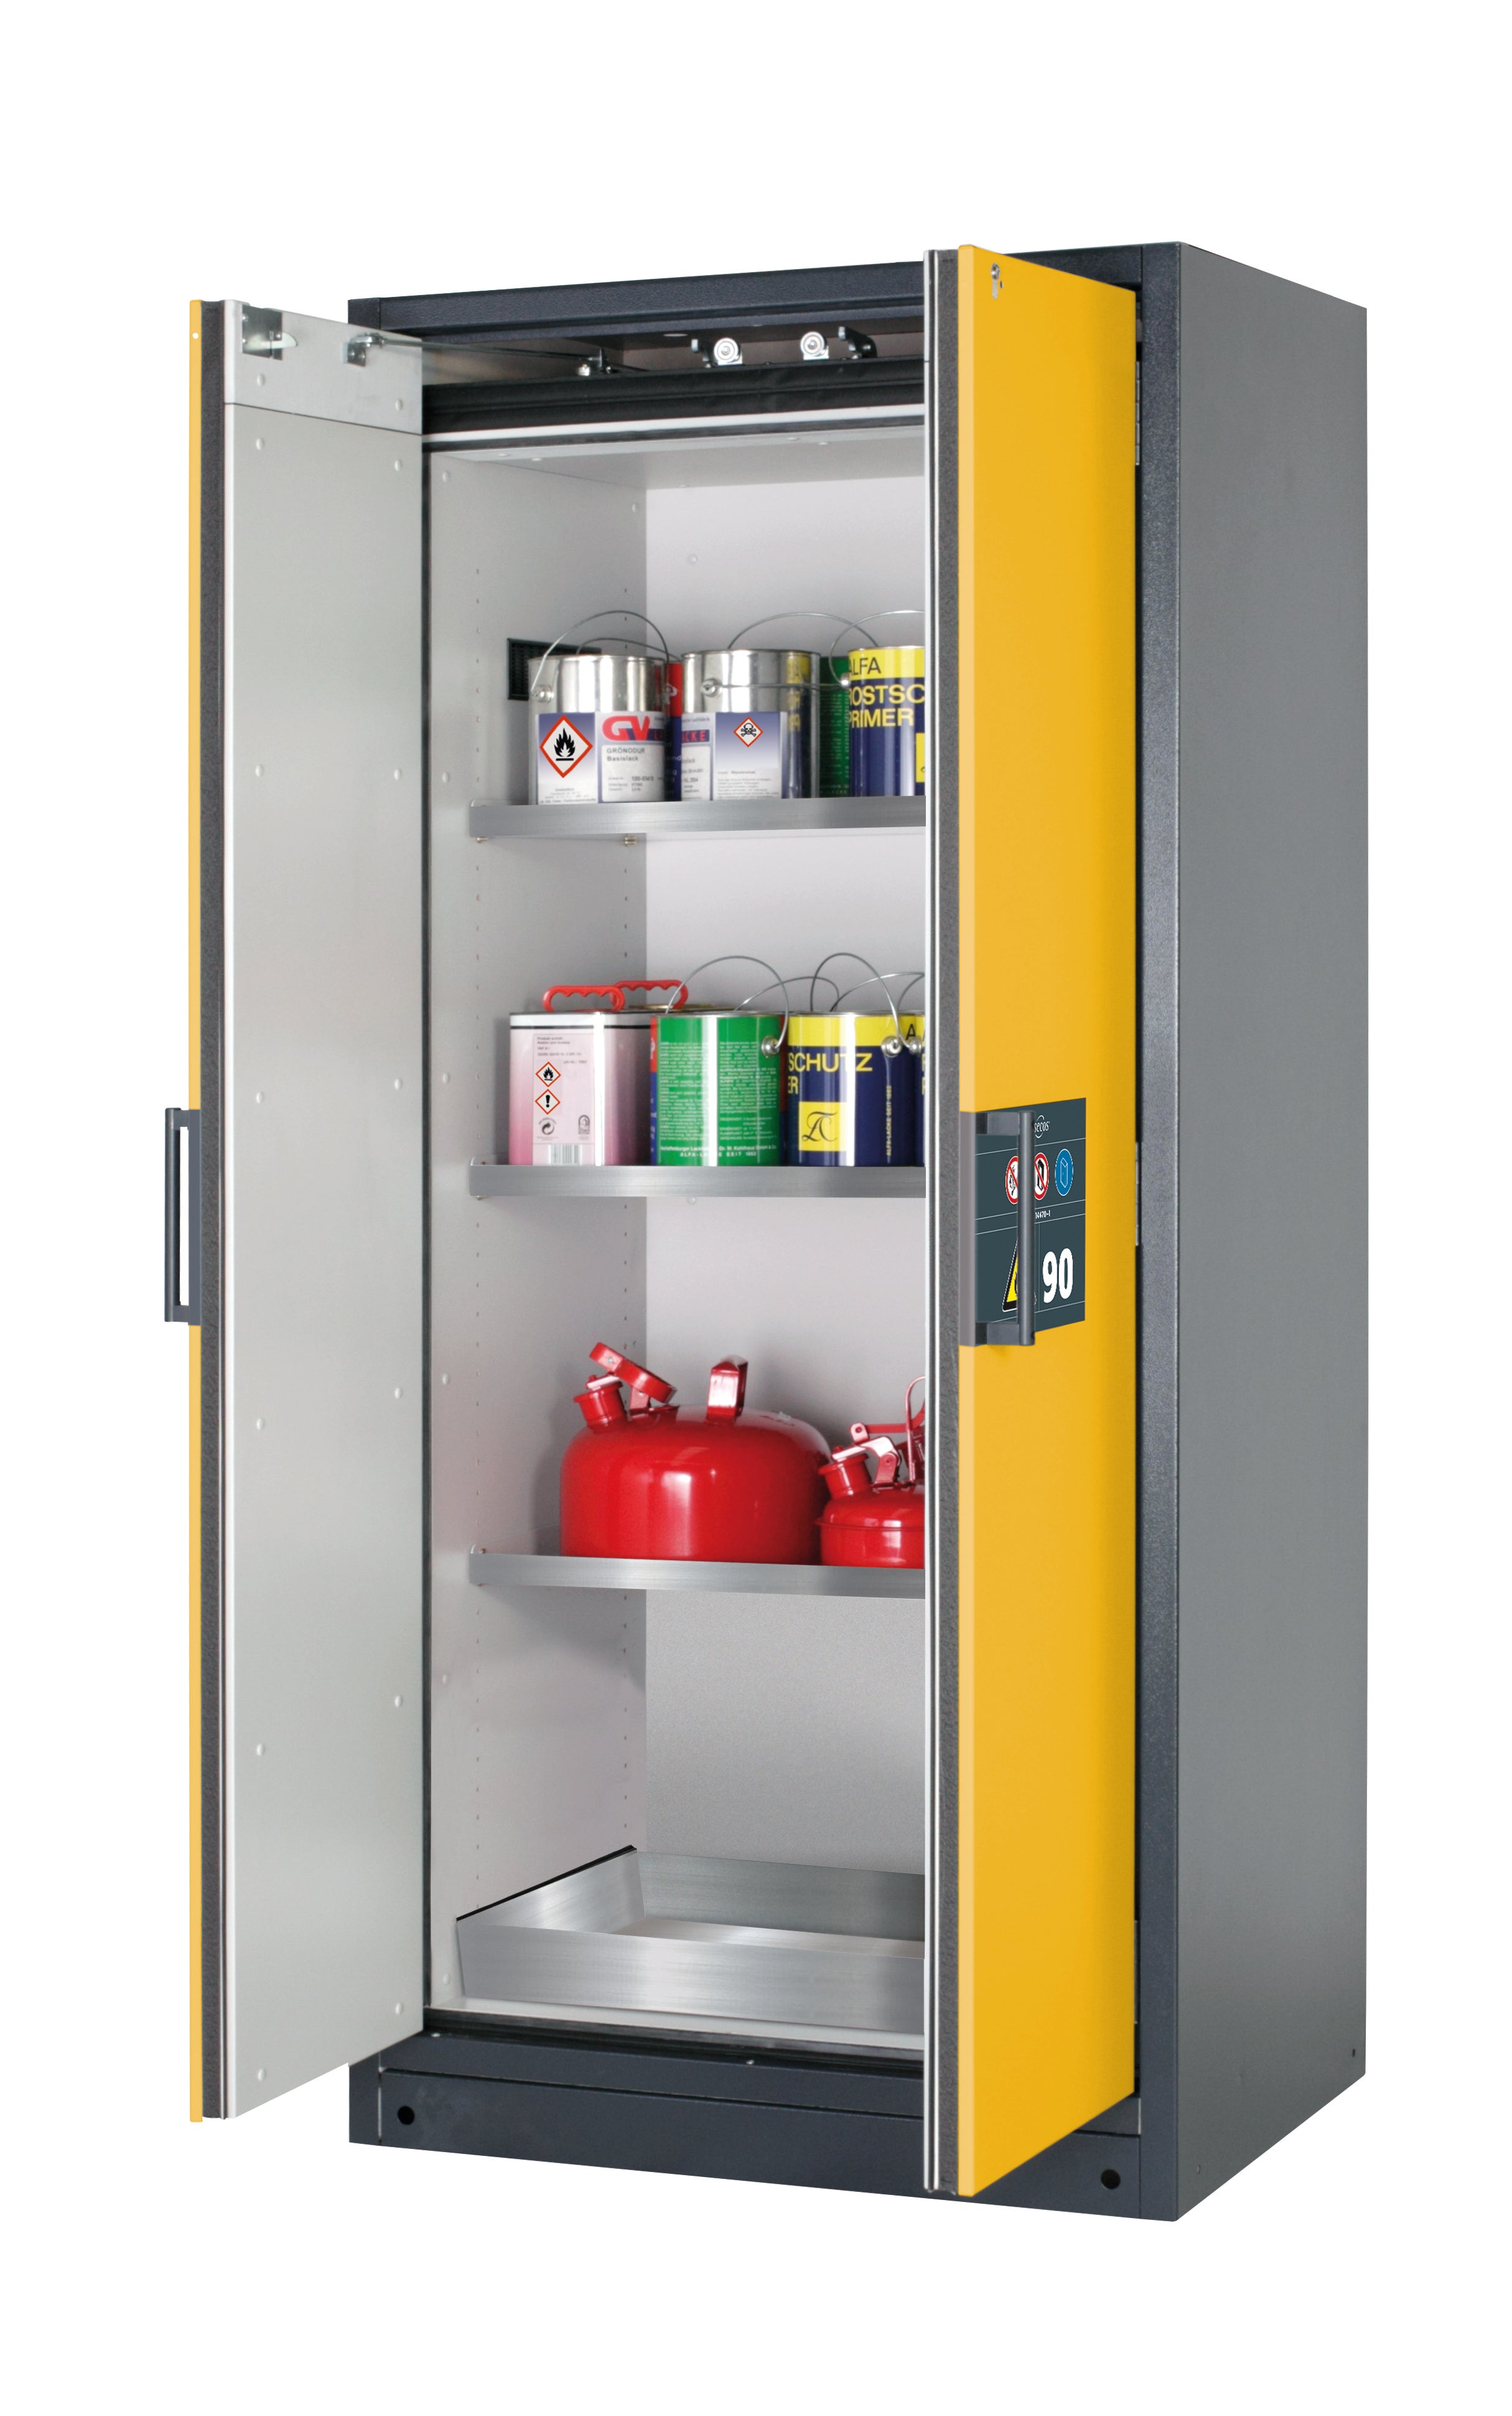 Type 90 safety storage cabinet Q-CLASSIC-90 model Q90.195.090 in warning yellow RAL 1004 with 3x shelf standard (stainless steel 1.4301),